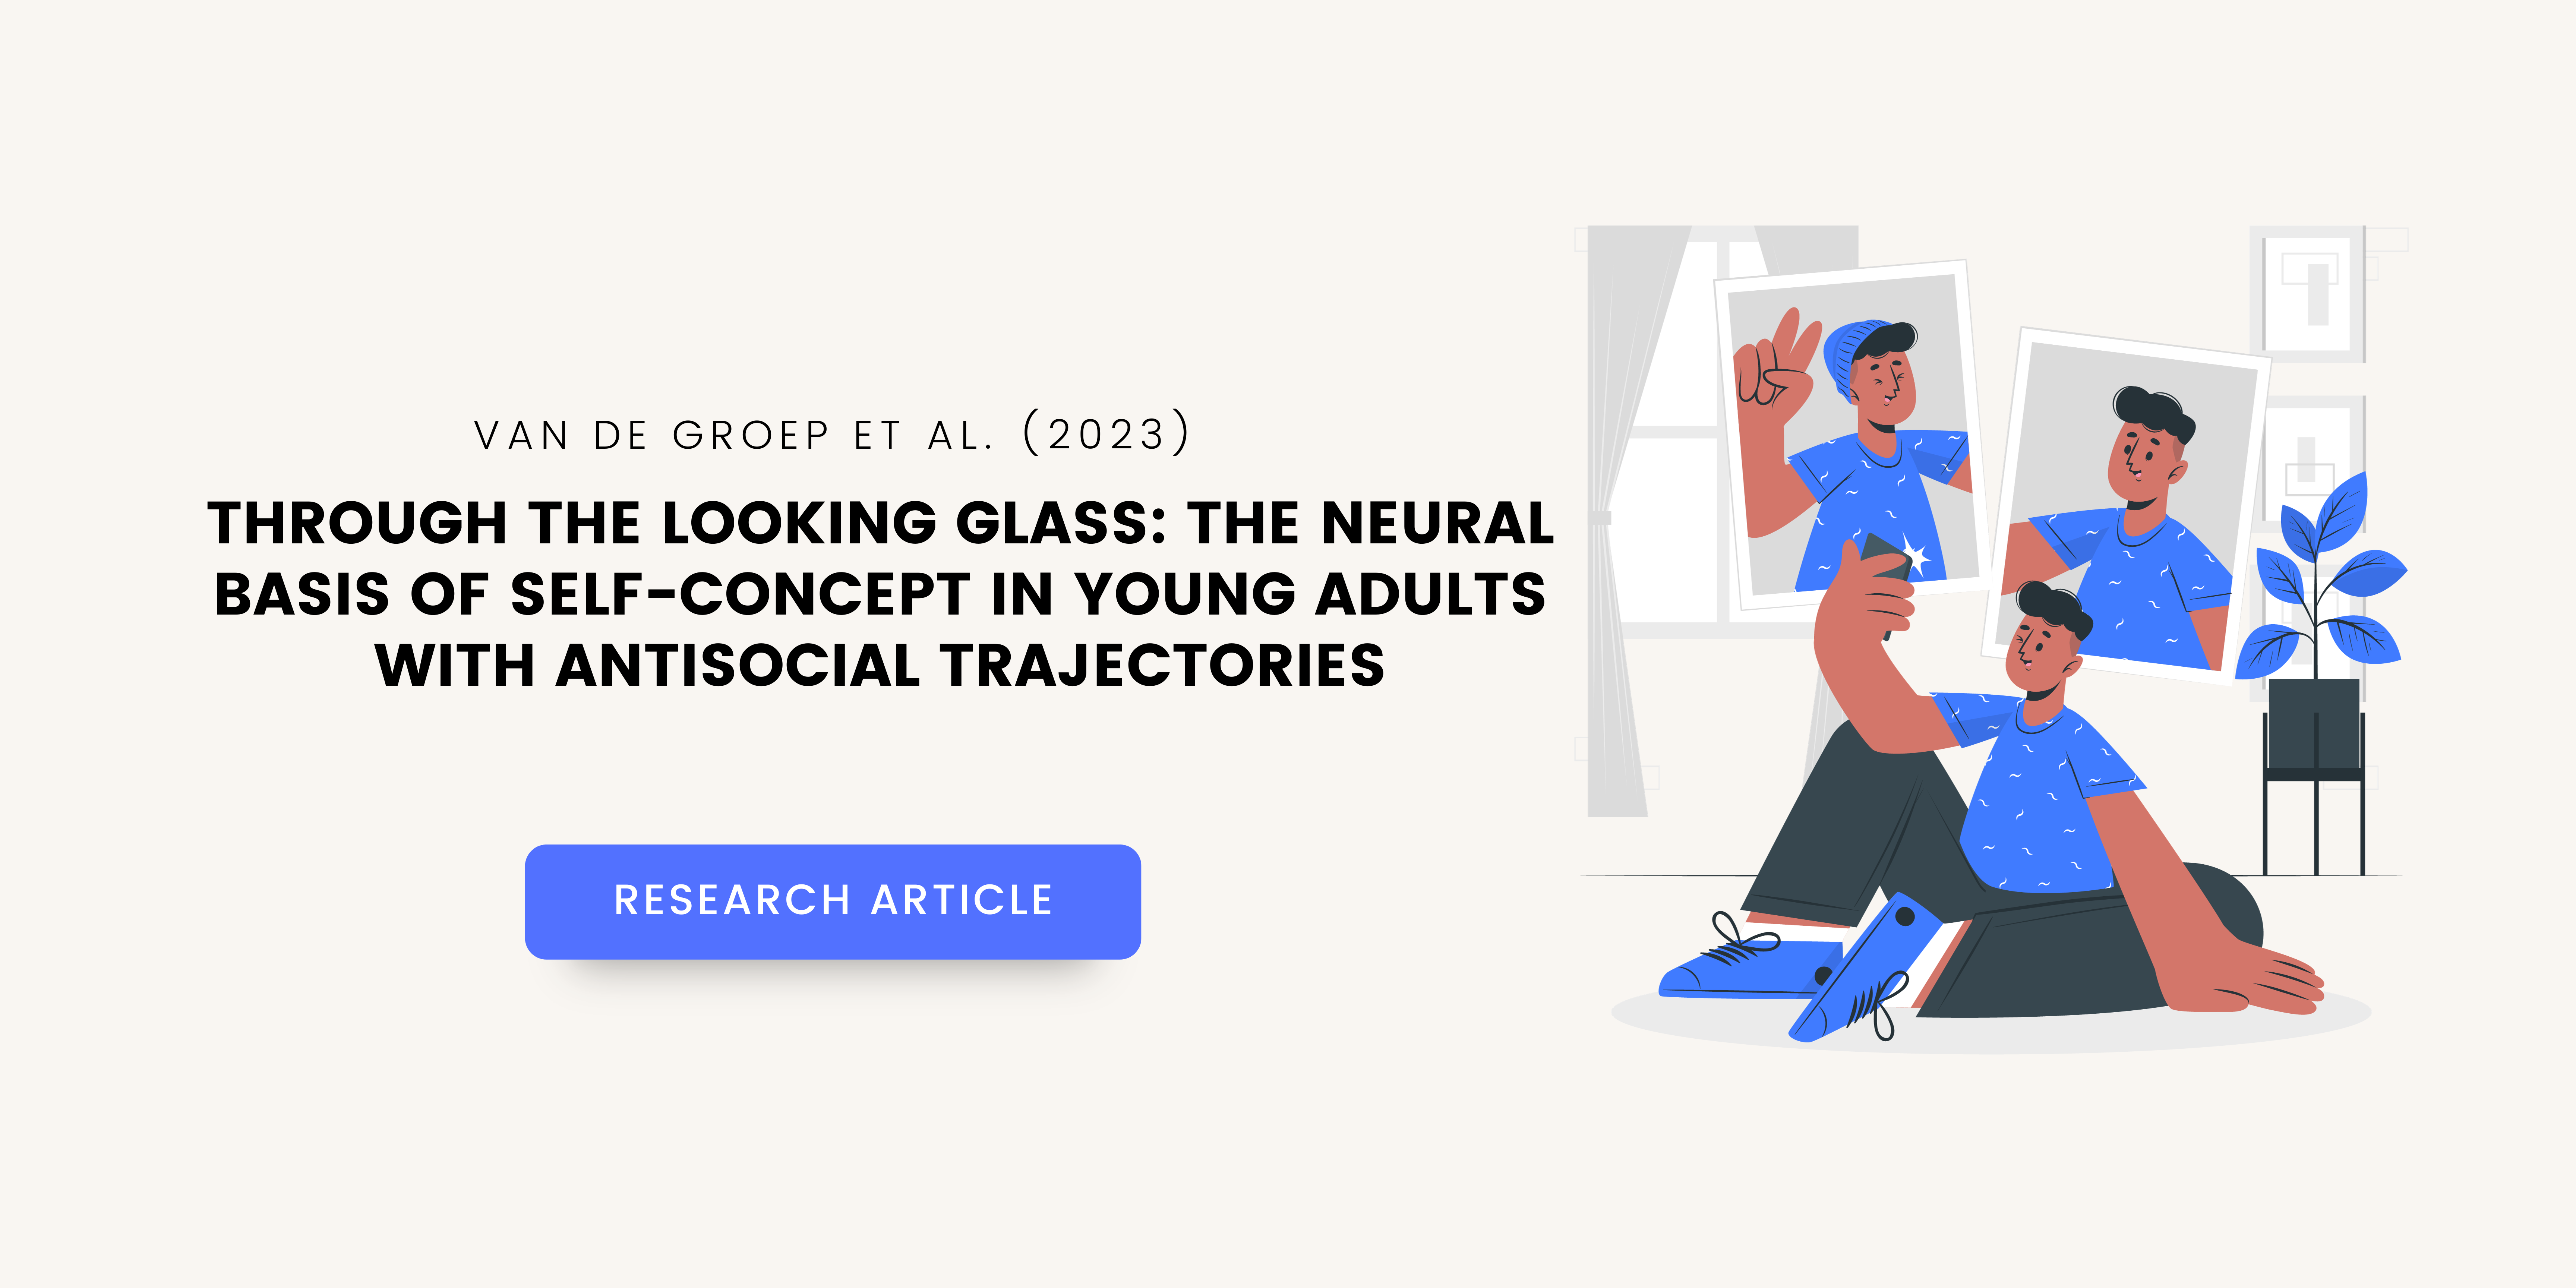 Through the looking glass: the neural basis of self-concept in young adults with antisocial trajectories